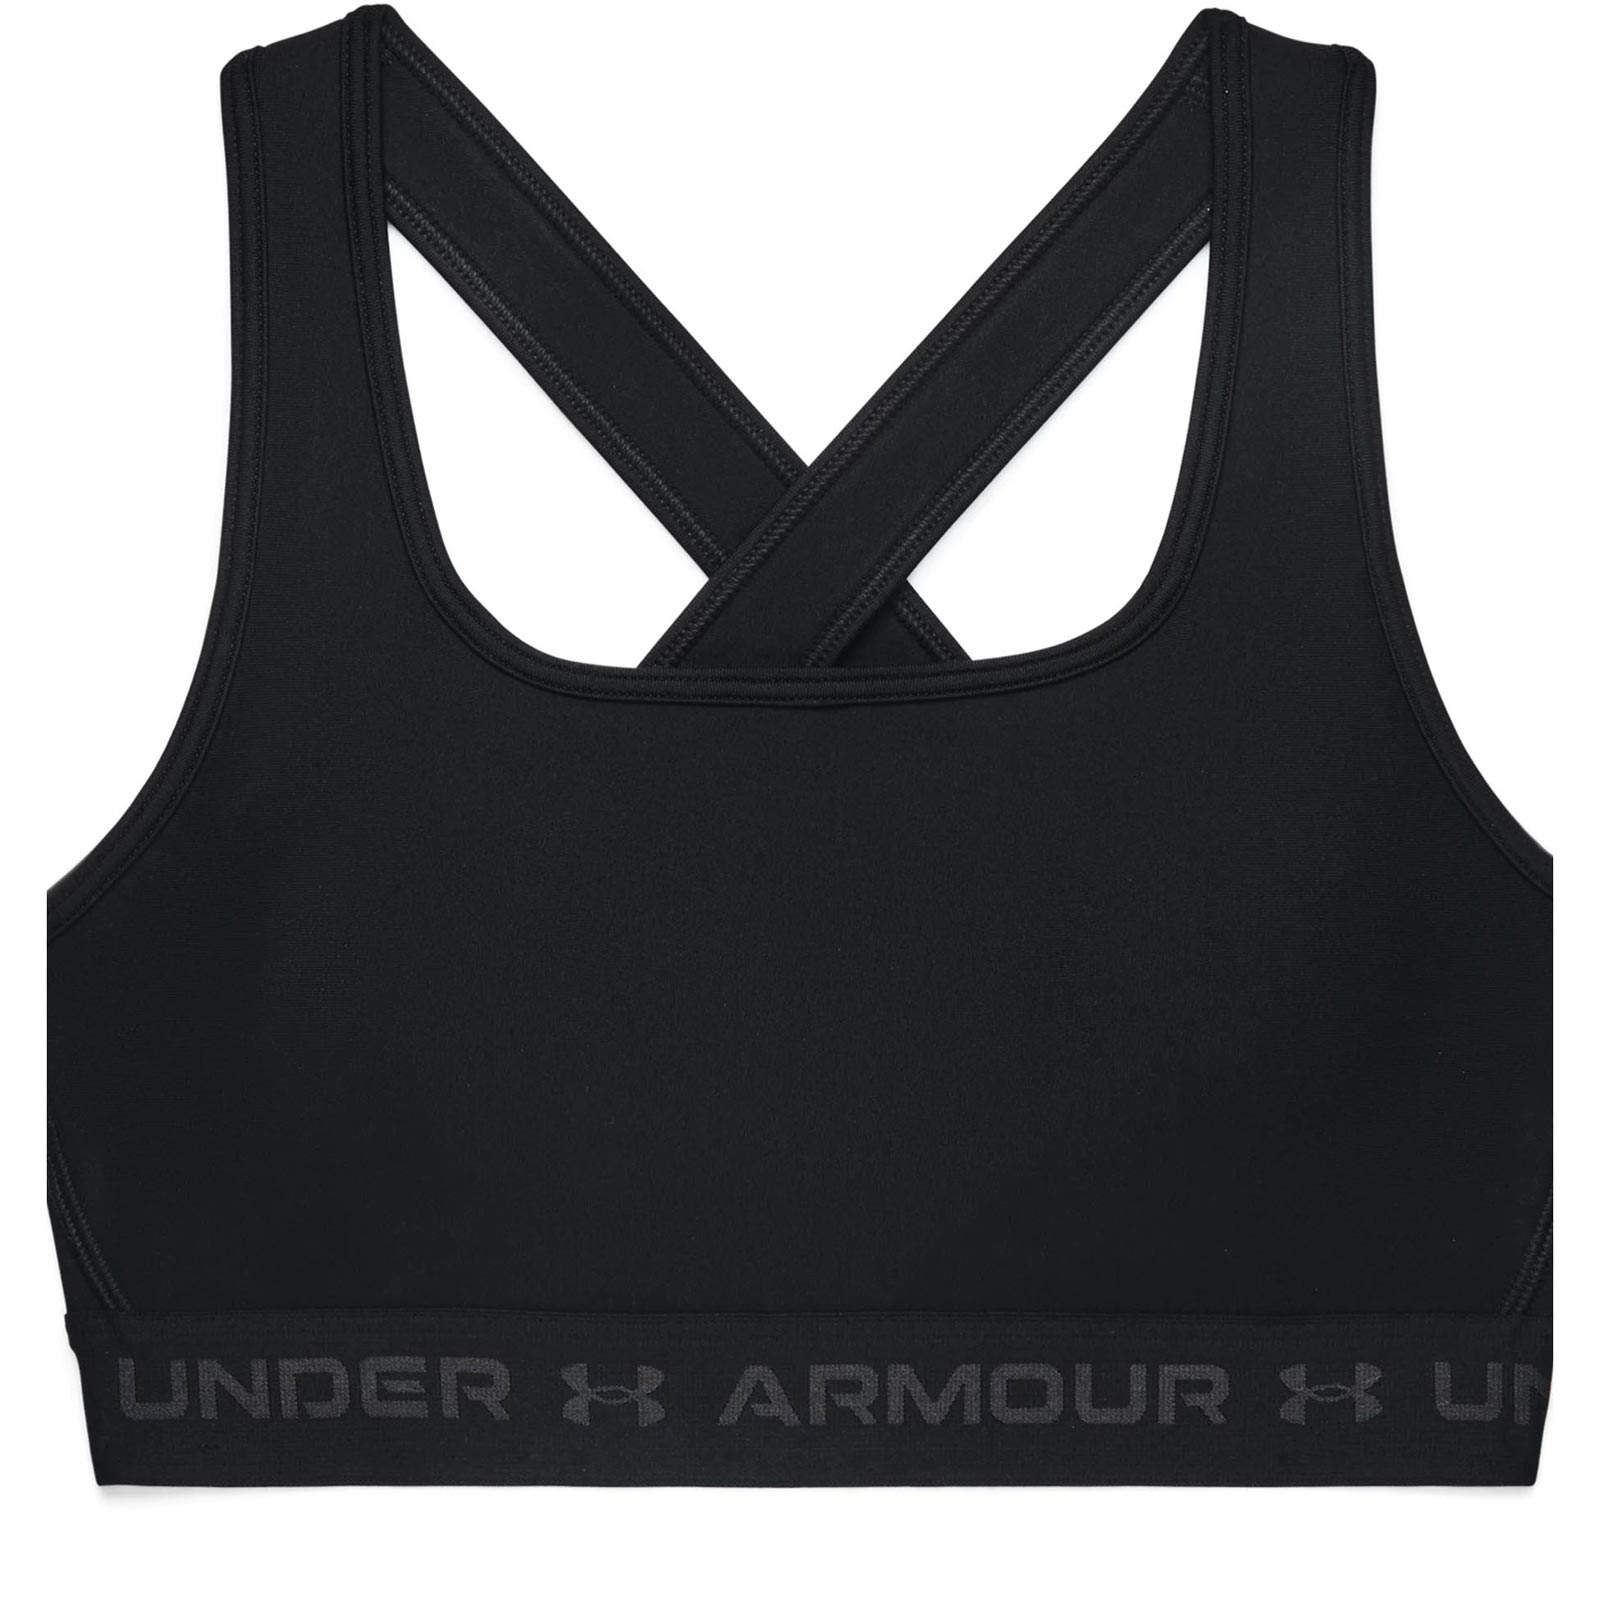 UNDER ARMOUR WOMENS ARMOUR® MID CROSSBACK SPORTS BRA